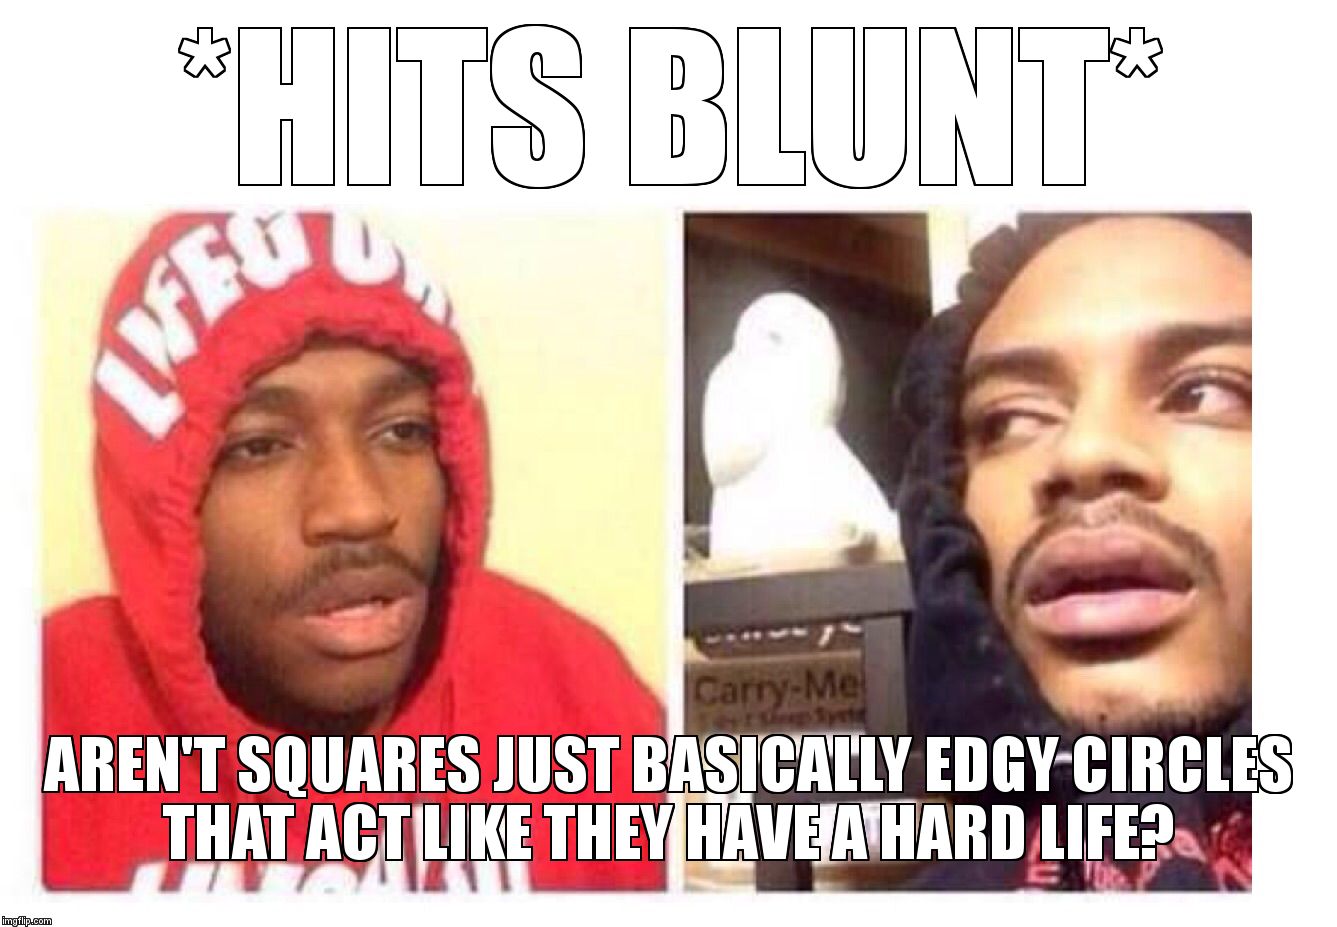 Hits blunt | *HITS BLUNT*; AREN'T SQUARES JUST BASICALLY EDGY CIRCLES THAT ACT LIKE THEY HAVE A HARD LIFE? | image tagged in hits blunt | made w/ Imgflip meme maker